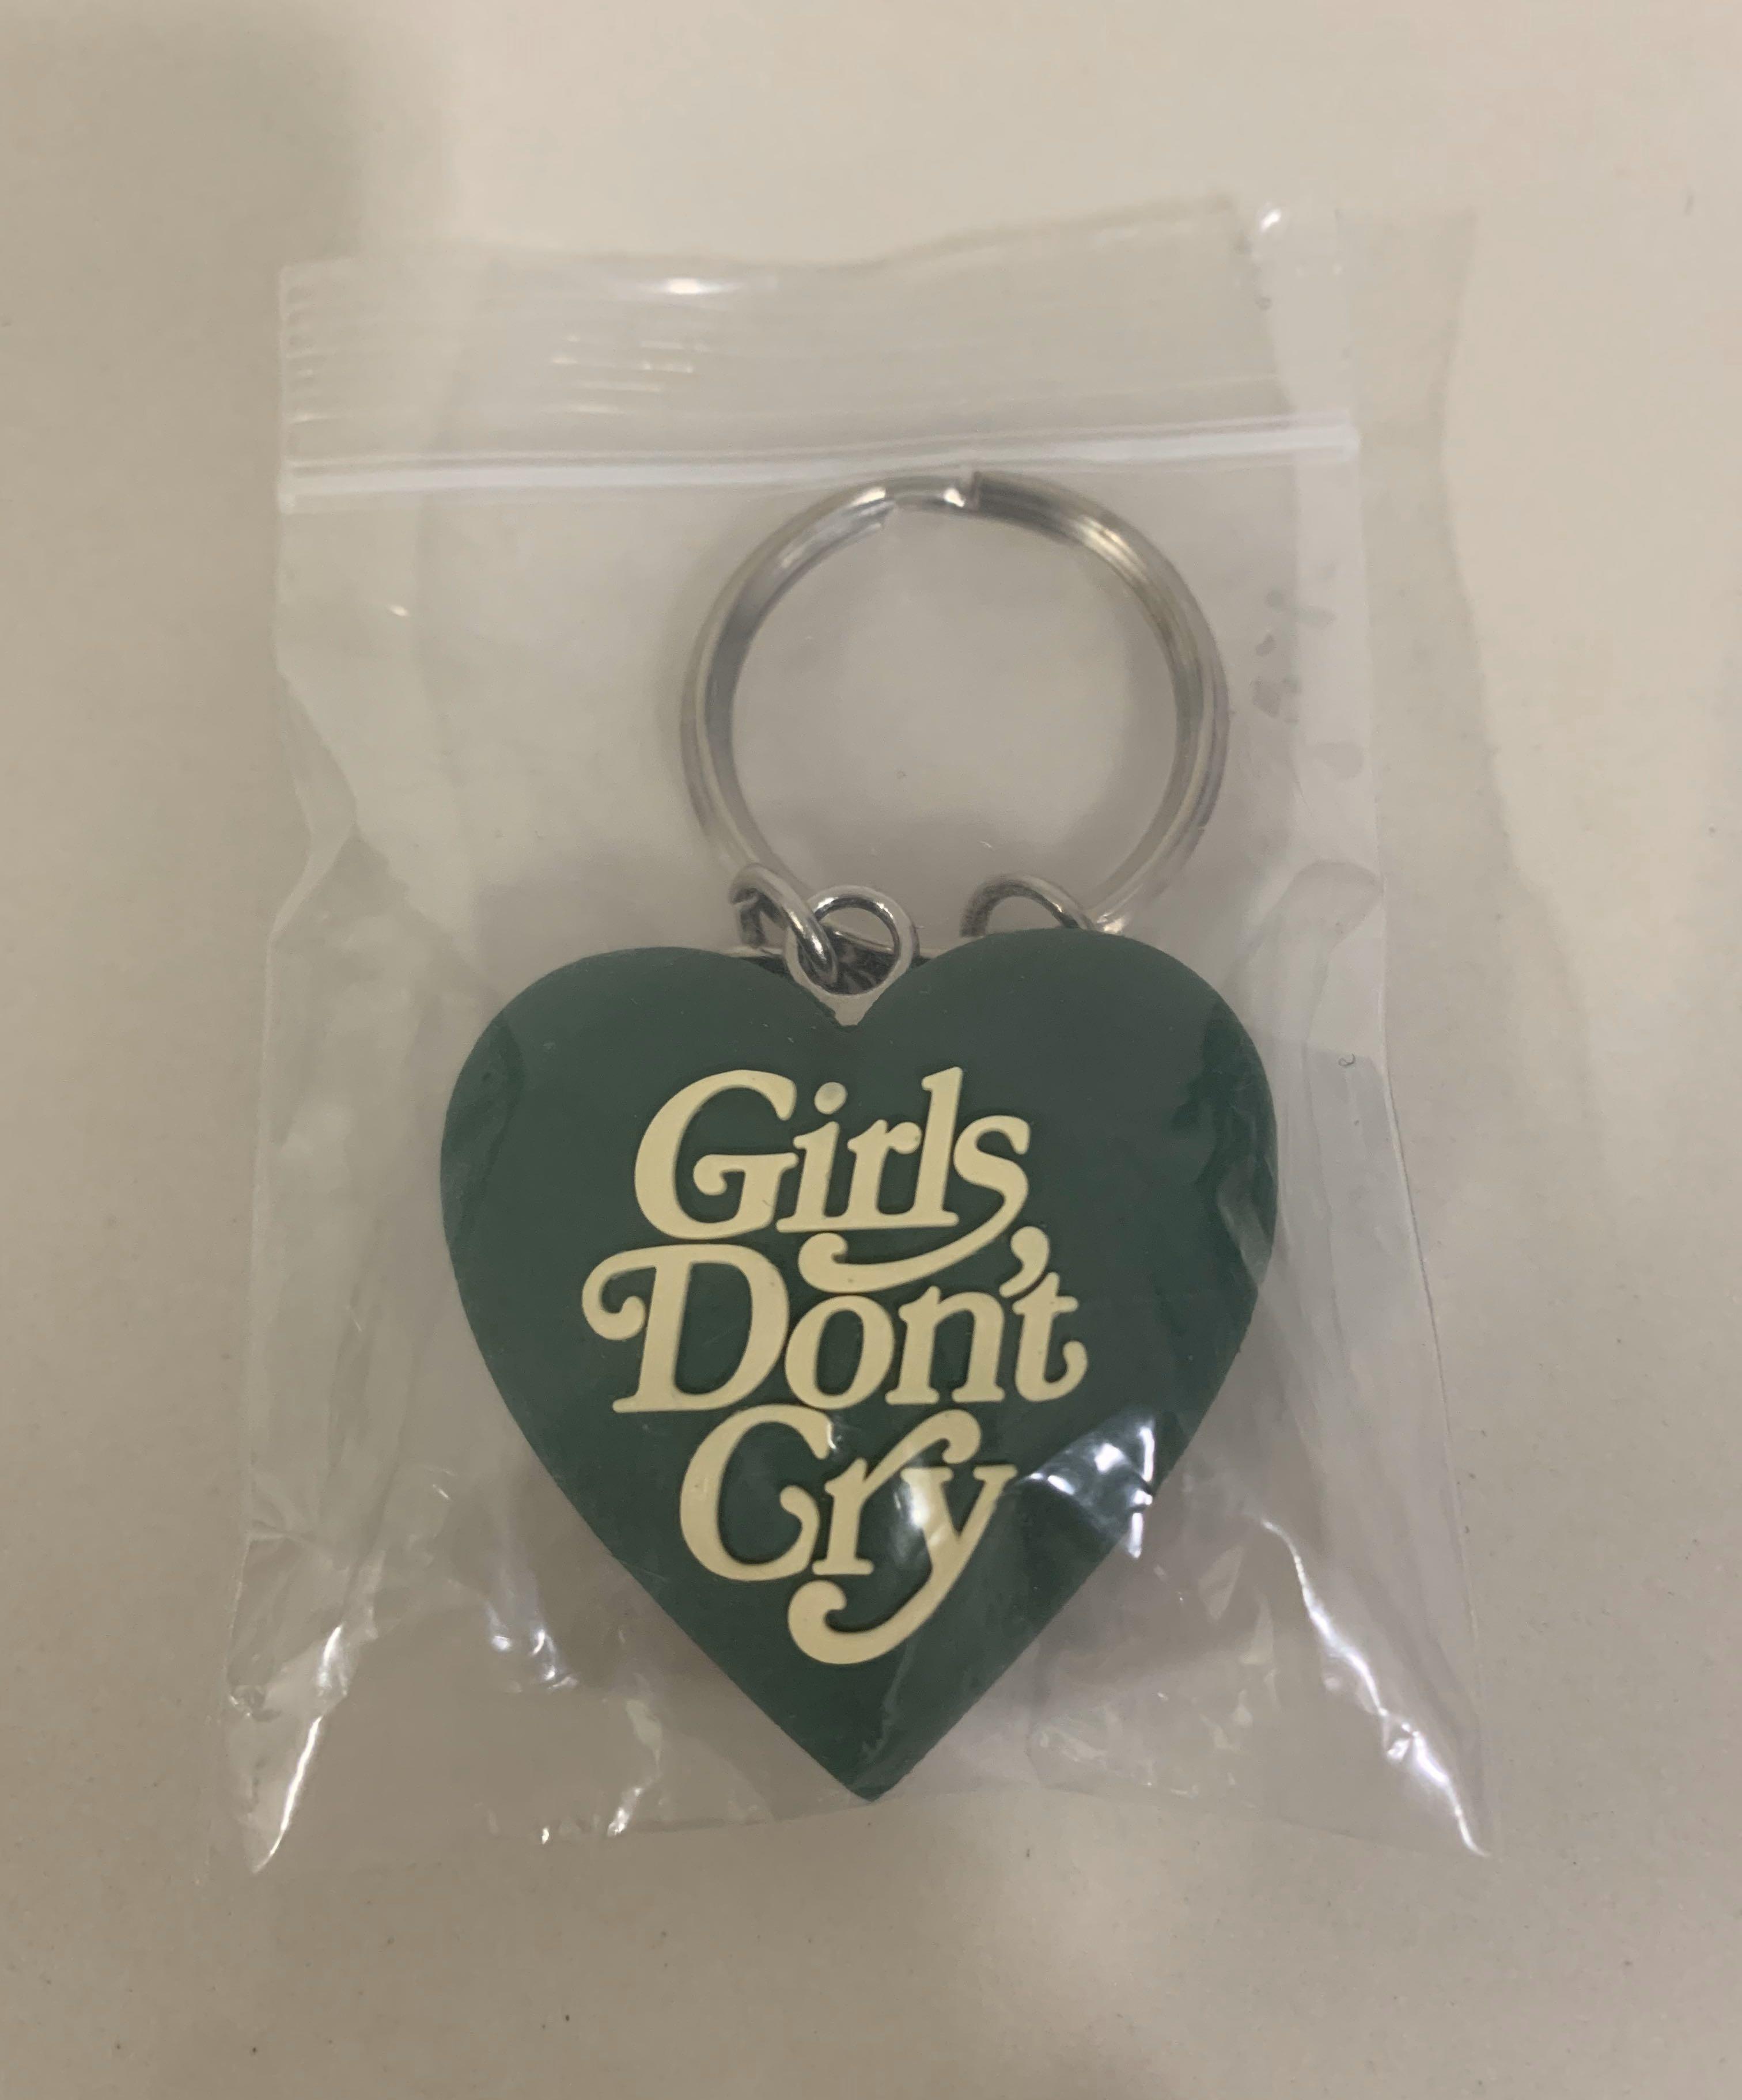 Verdy - Girls dont cry keychain